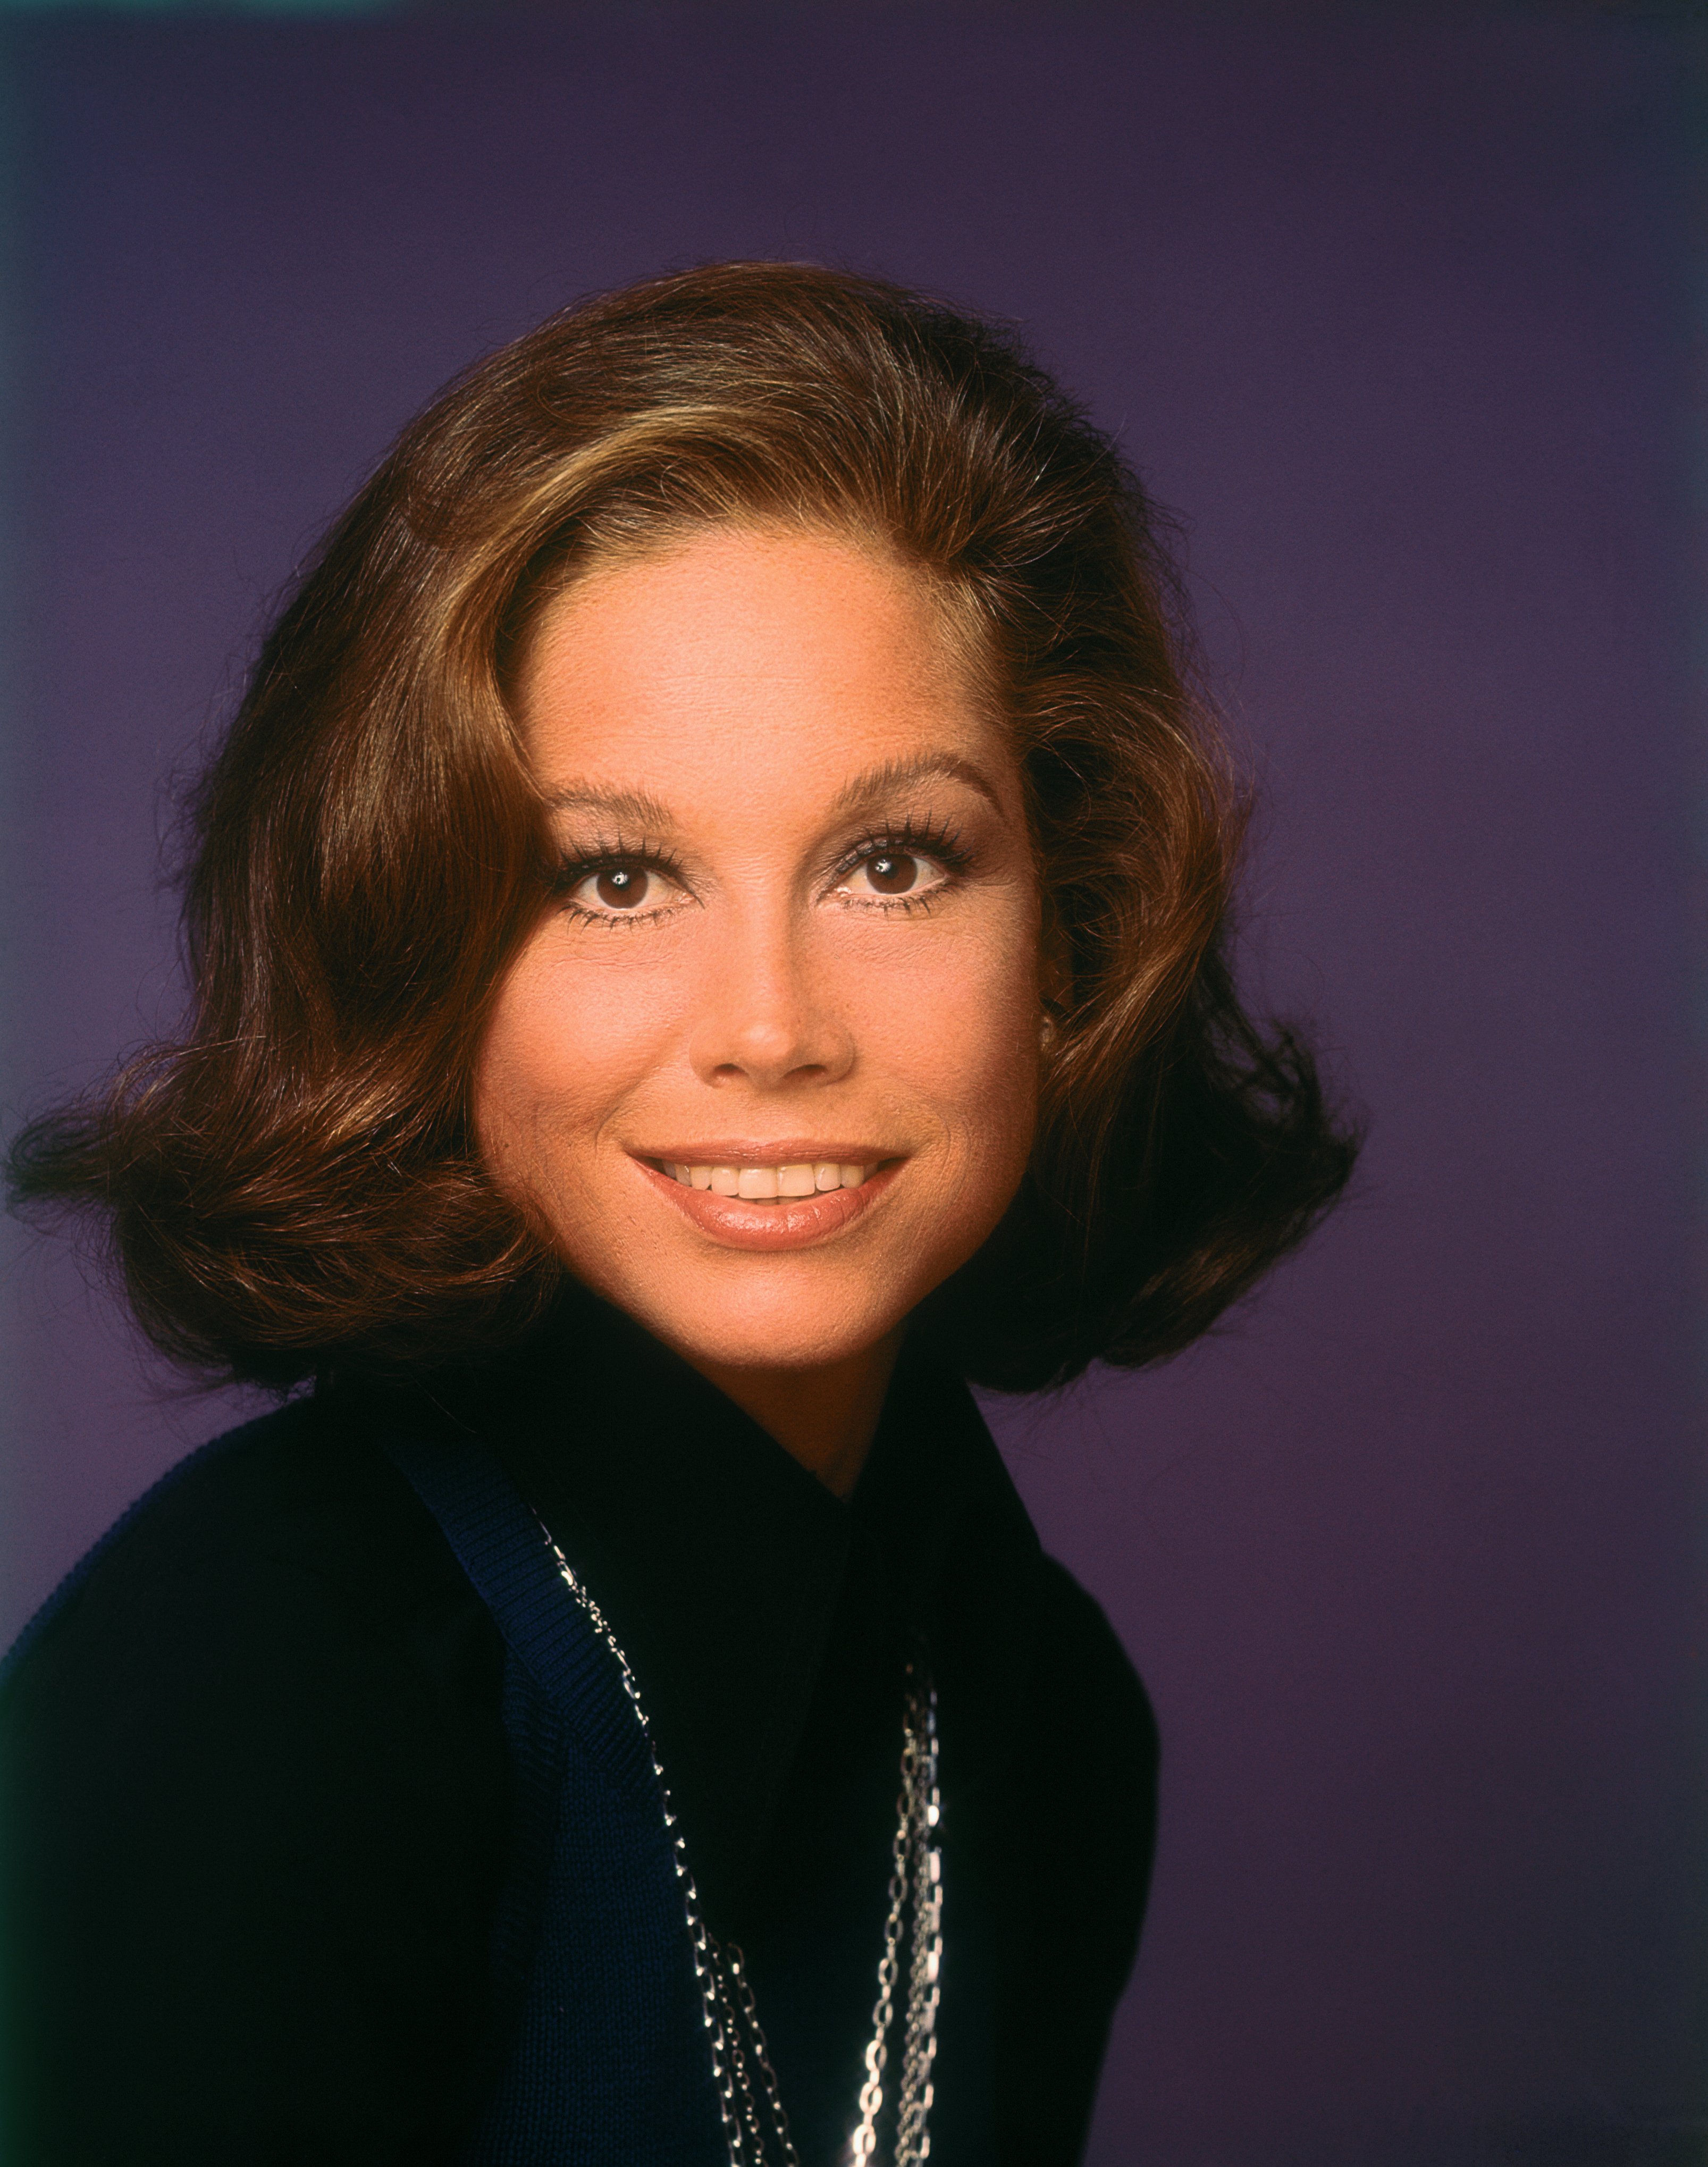 Close-up of smiling actress Mary Tyler Moore who stars in the television series The Mary Tyler Moore Show, circa 1975 | Photo: Getty Images